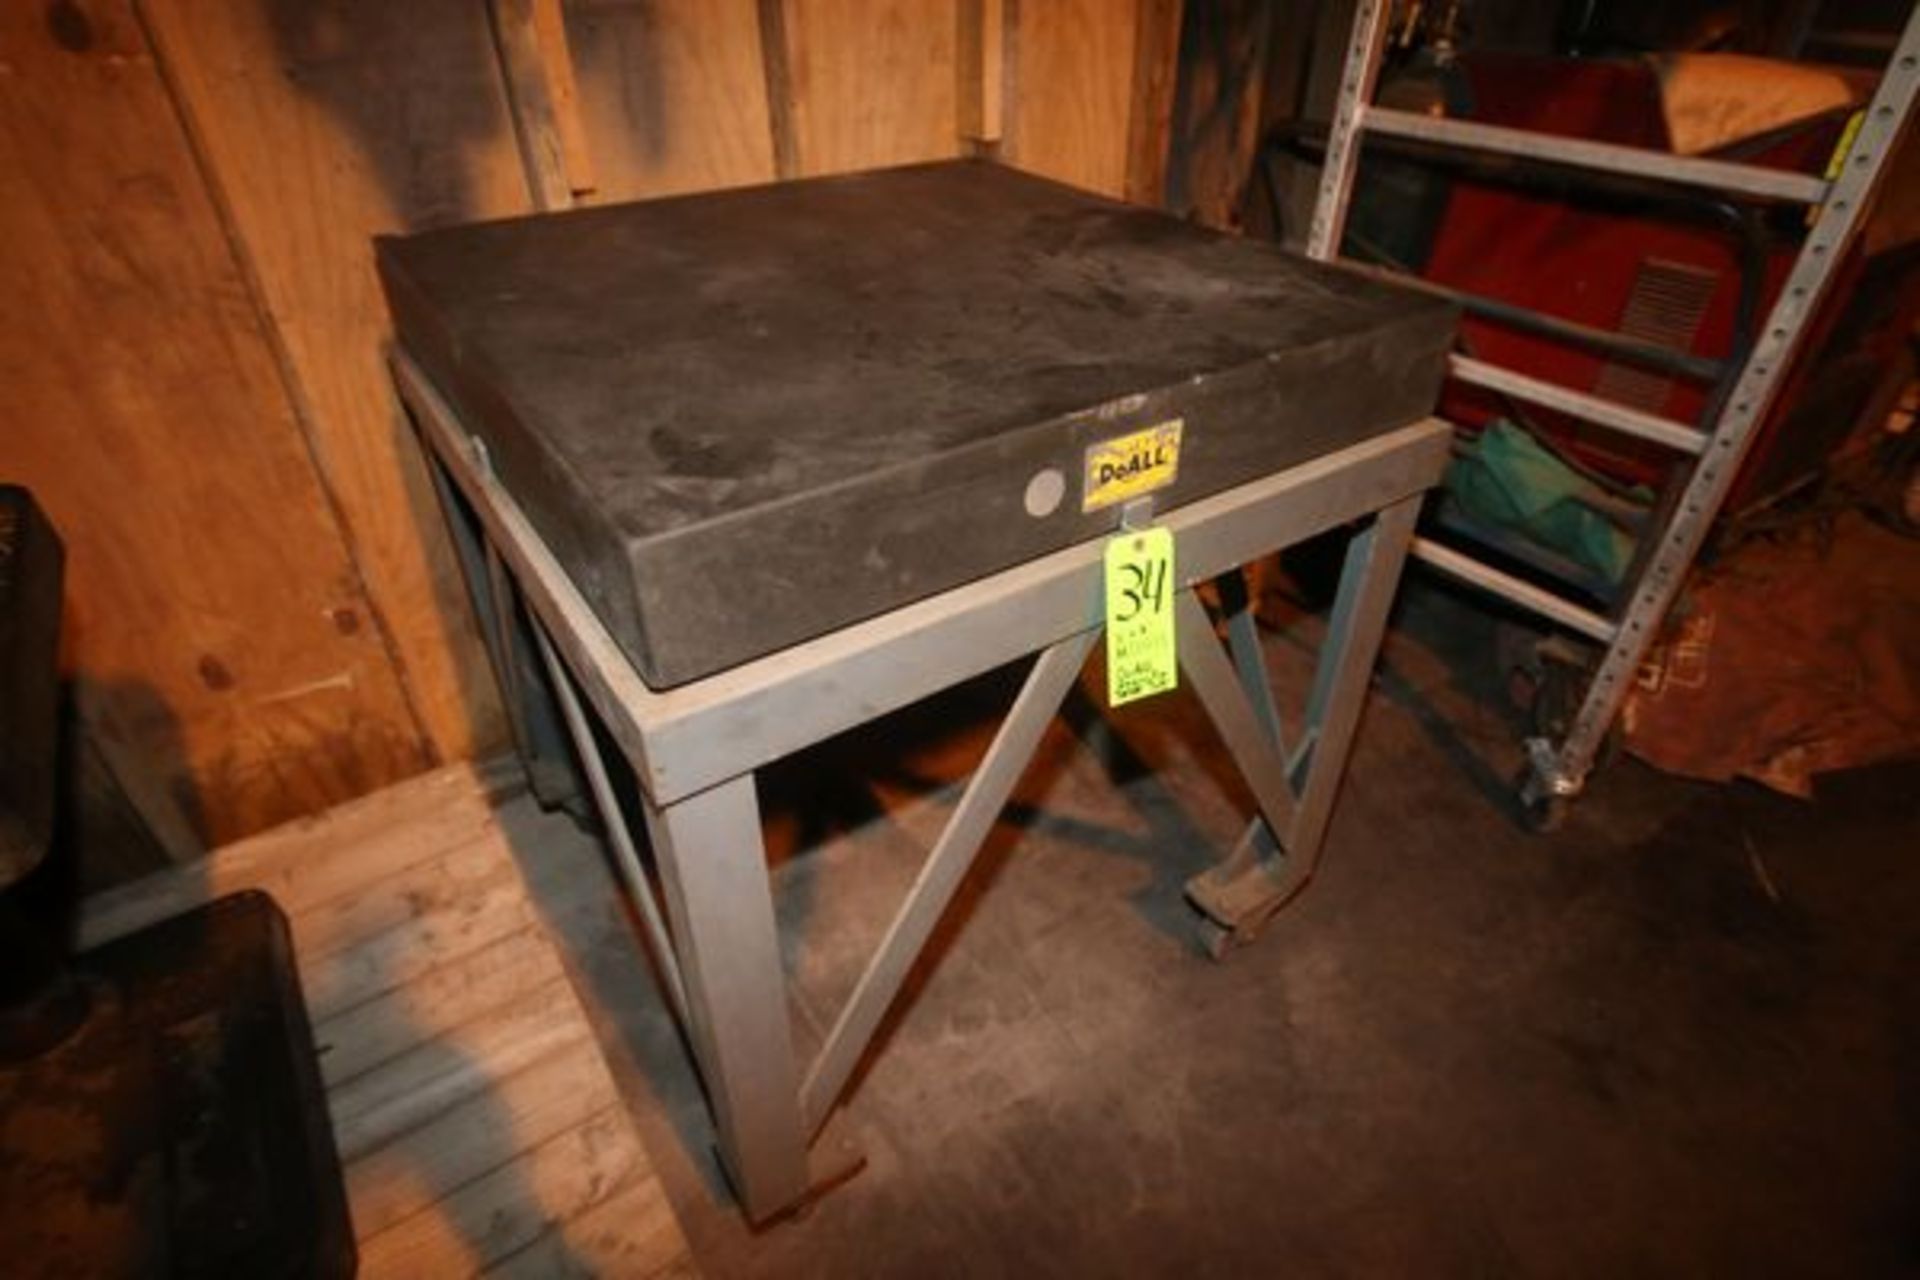 DoAll Aprox. 3' x 3' Granite Table Top, Model 20002, S/N 874-0, Mounted on Portable Cart